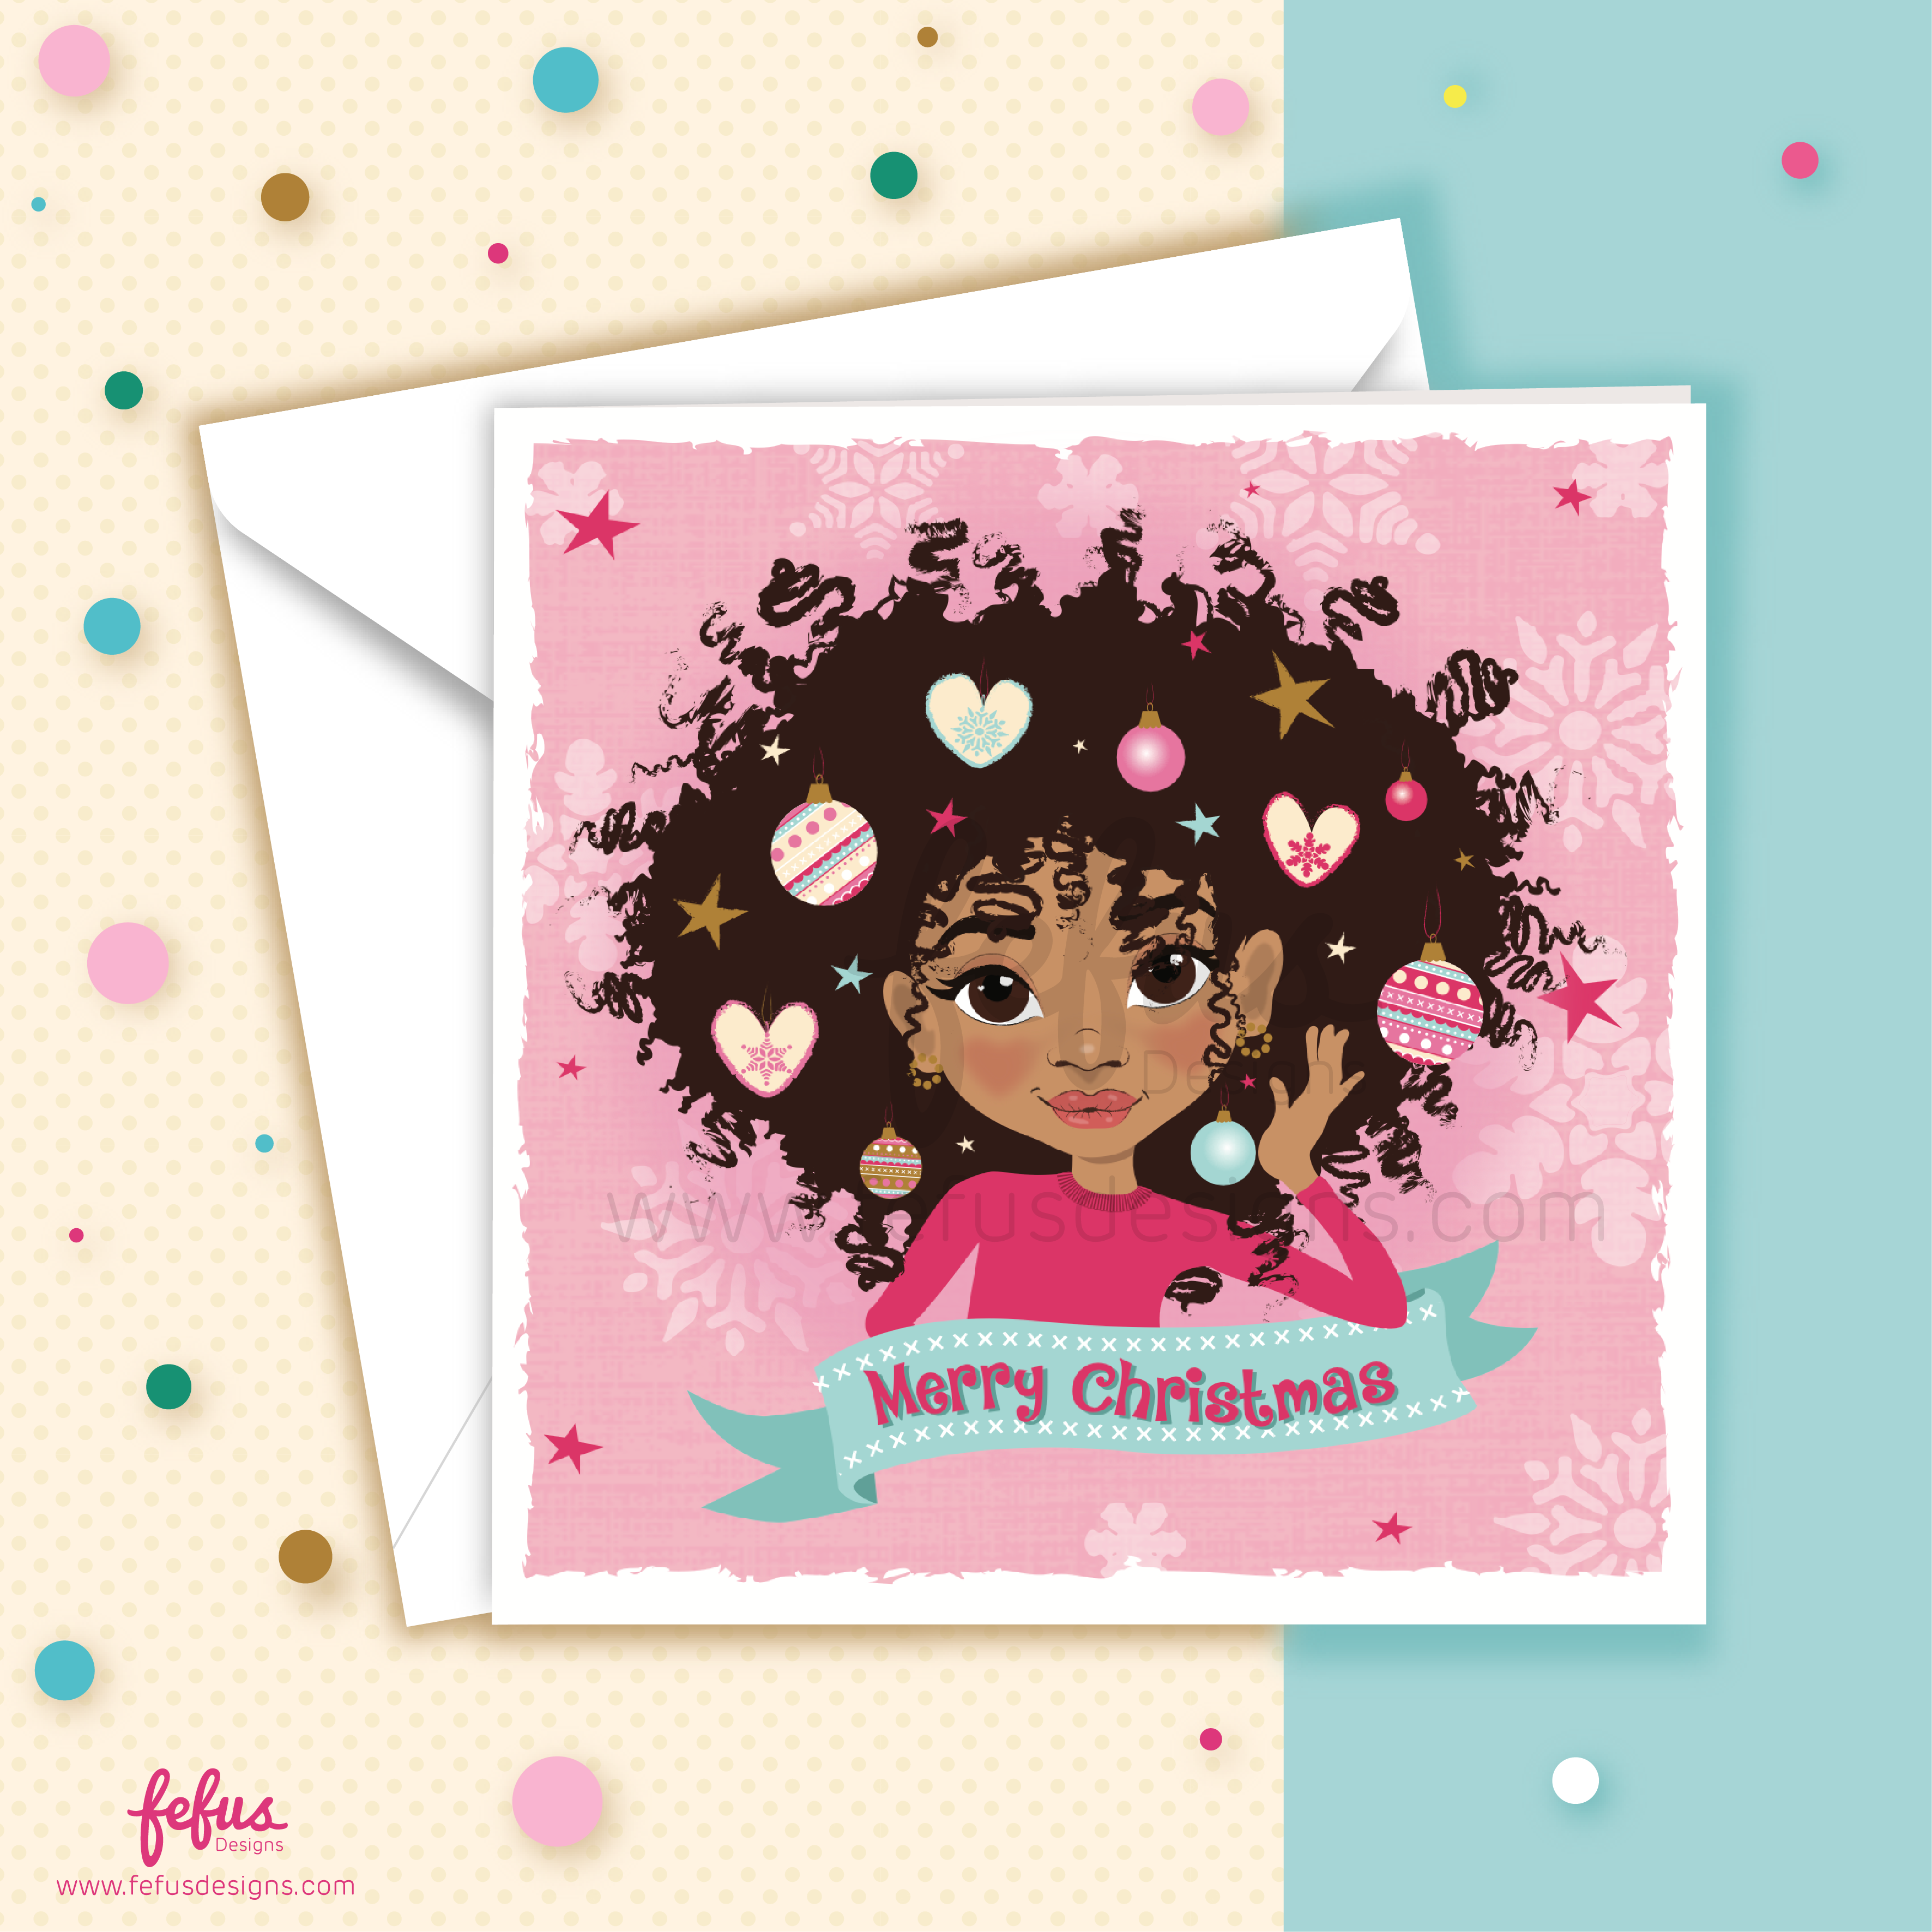 Merry Christmas Brown Afro Princess Card | Diverse Kids Holiday Greeting | Fefus Designs